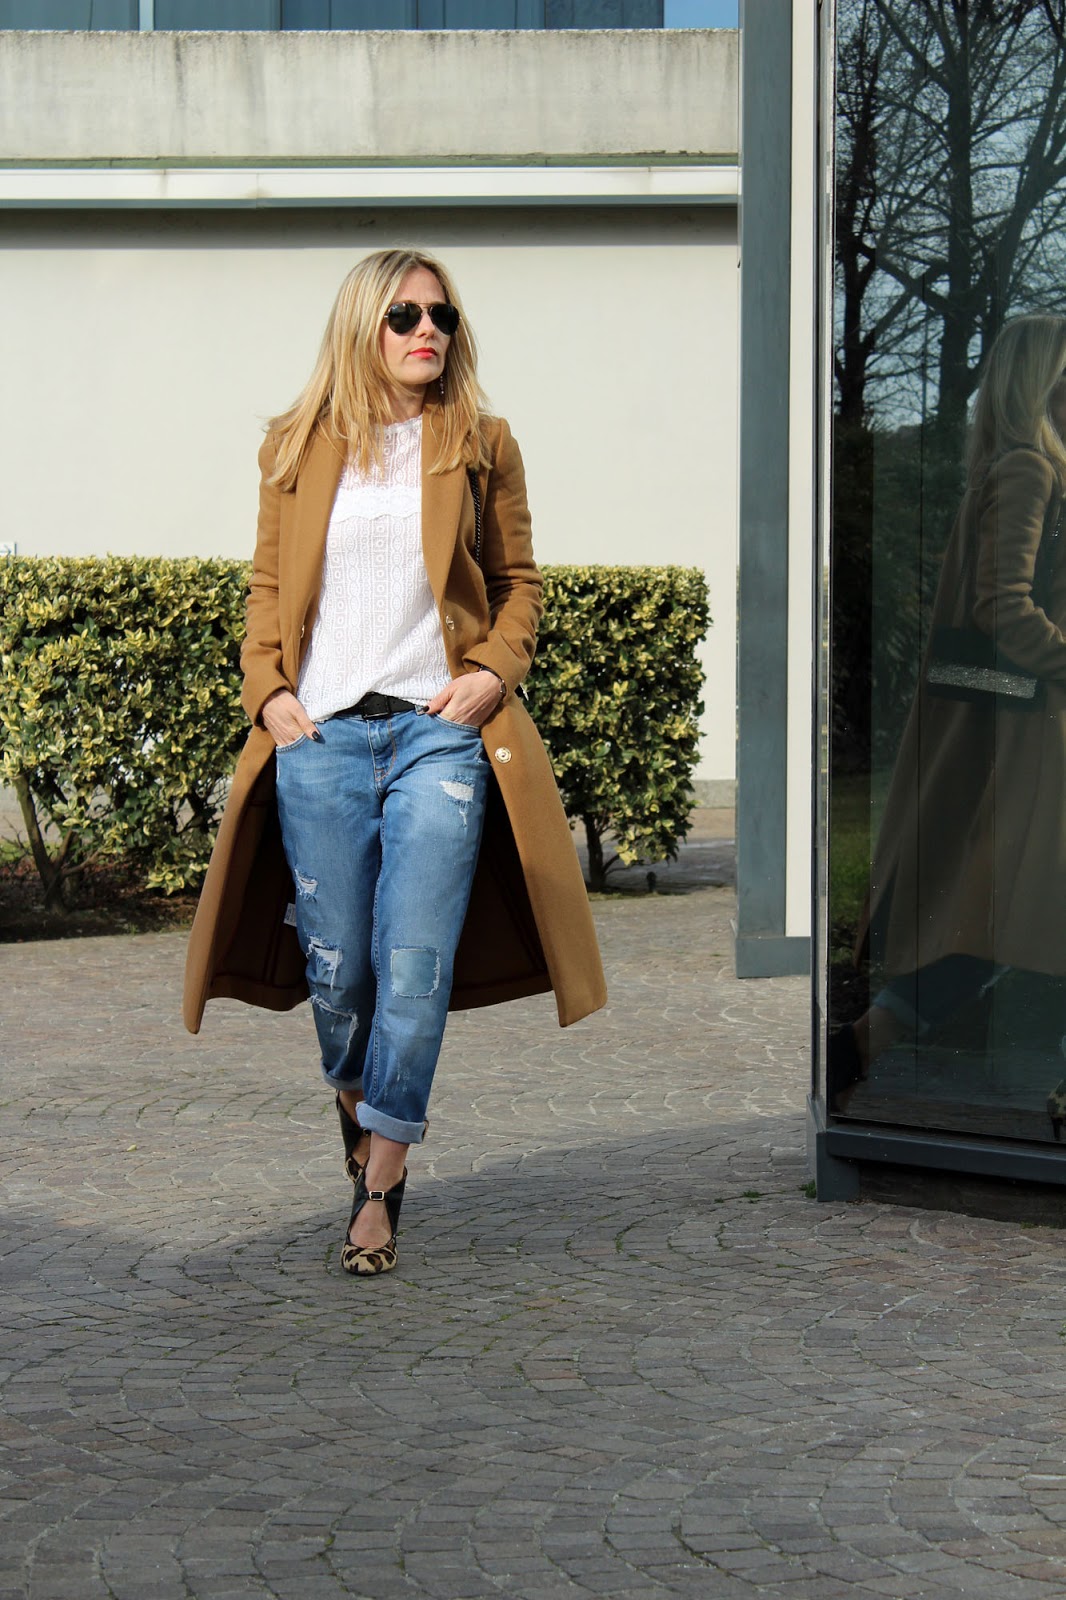 Eniwhere Fashion - Camel coat and animalier shoes